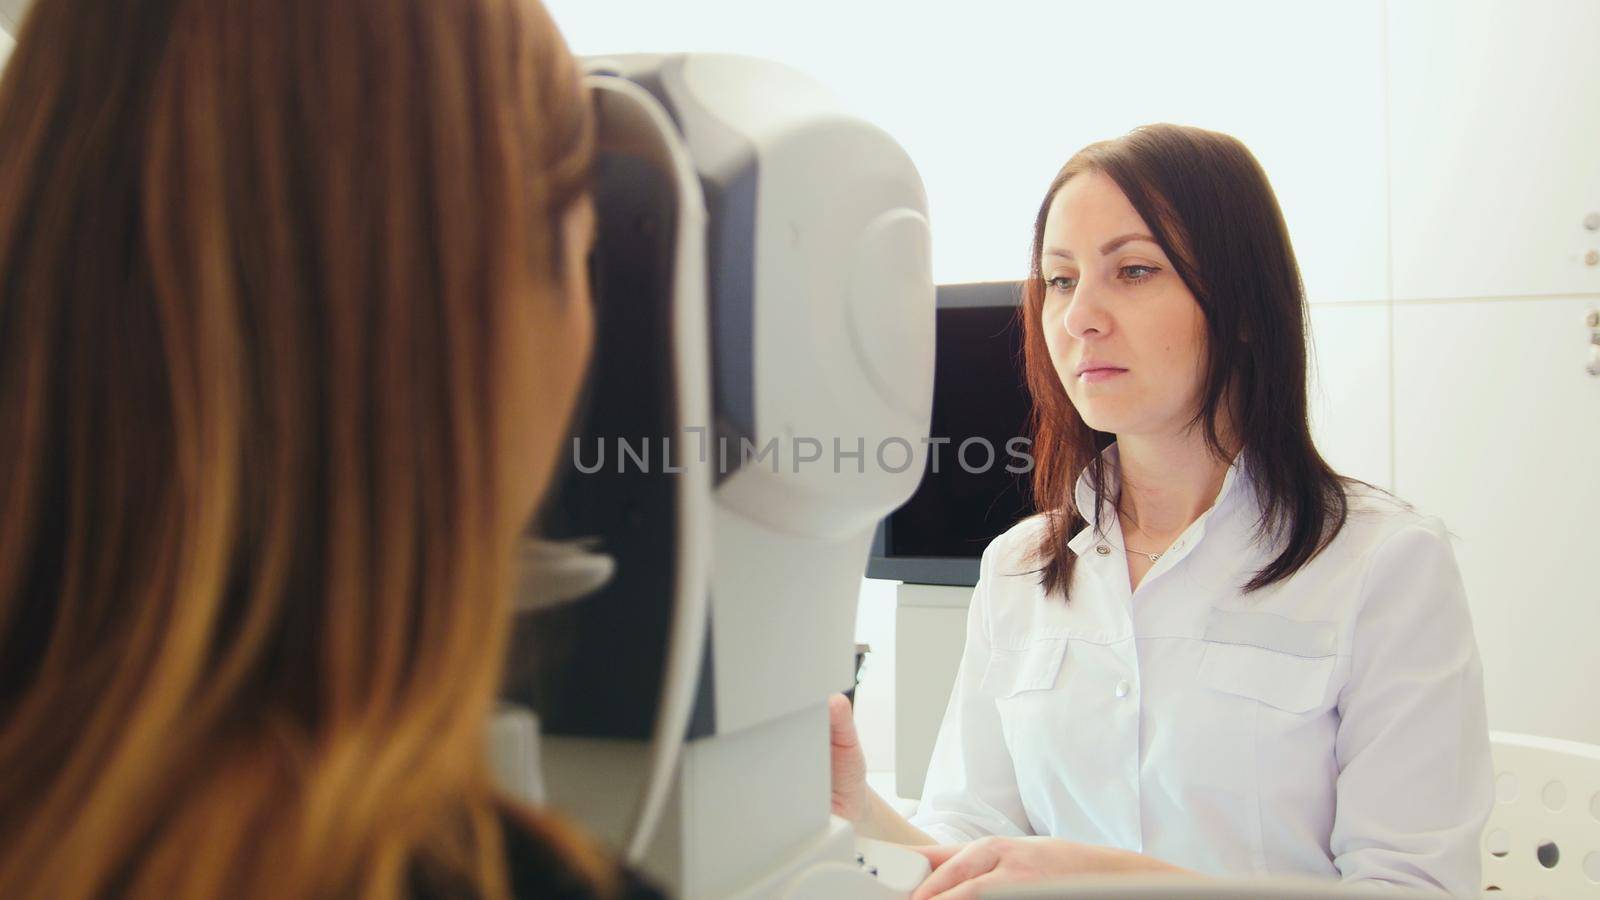 Ophthalmologist in eyes clinic doing diagnostic with vision for patient - high healthcare technology in medicine, horizontal